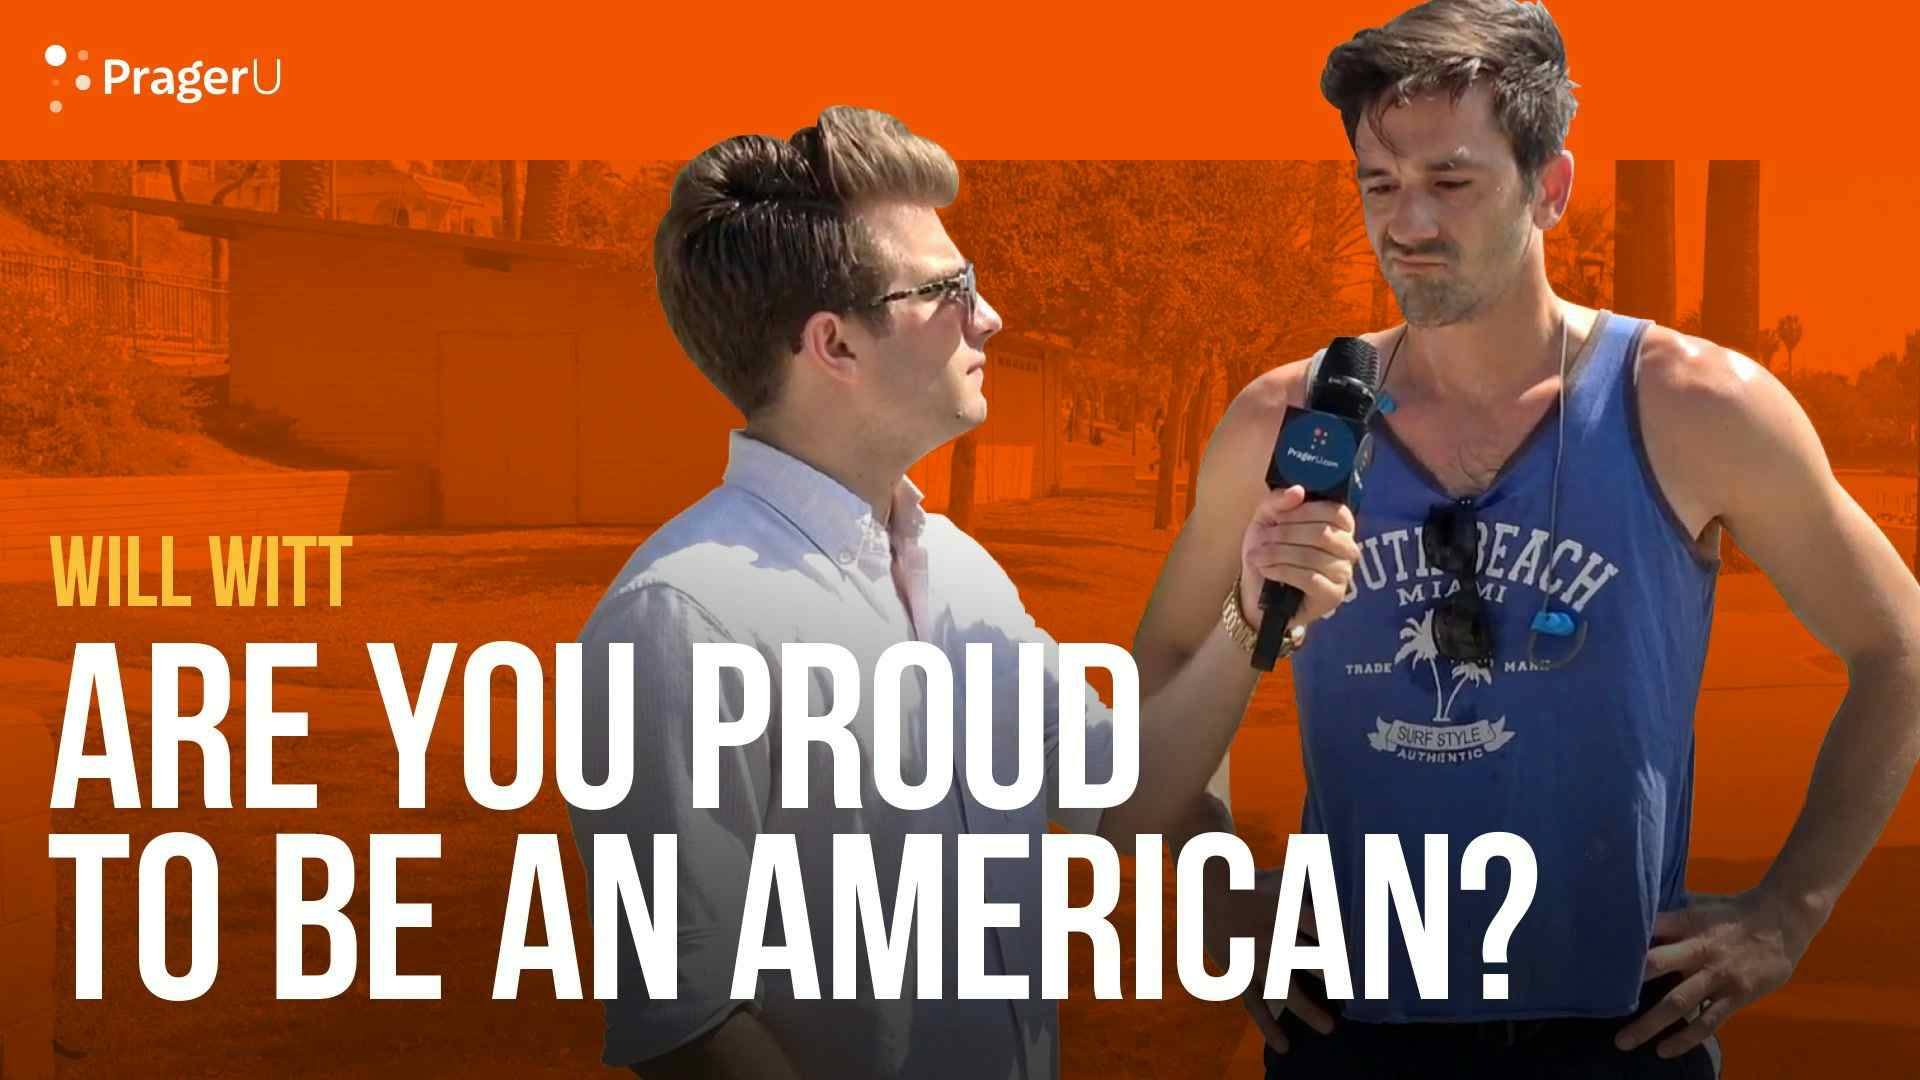 Are You Proud to Be an American?